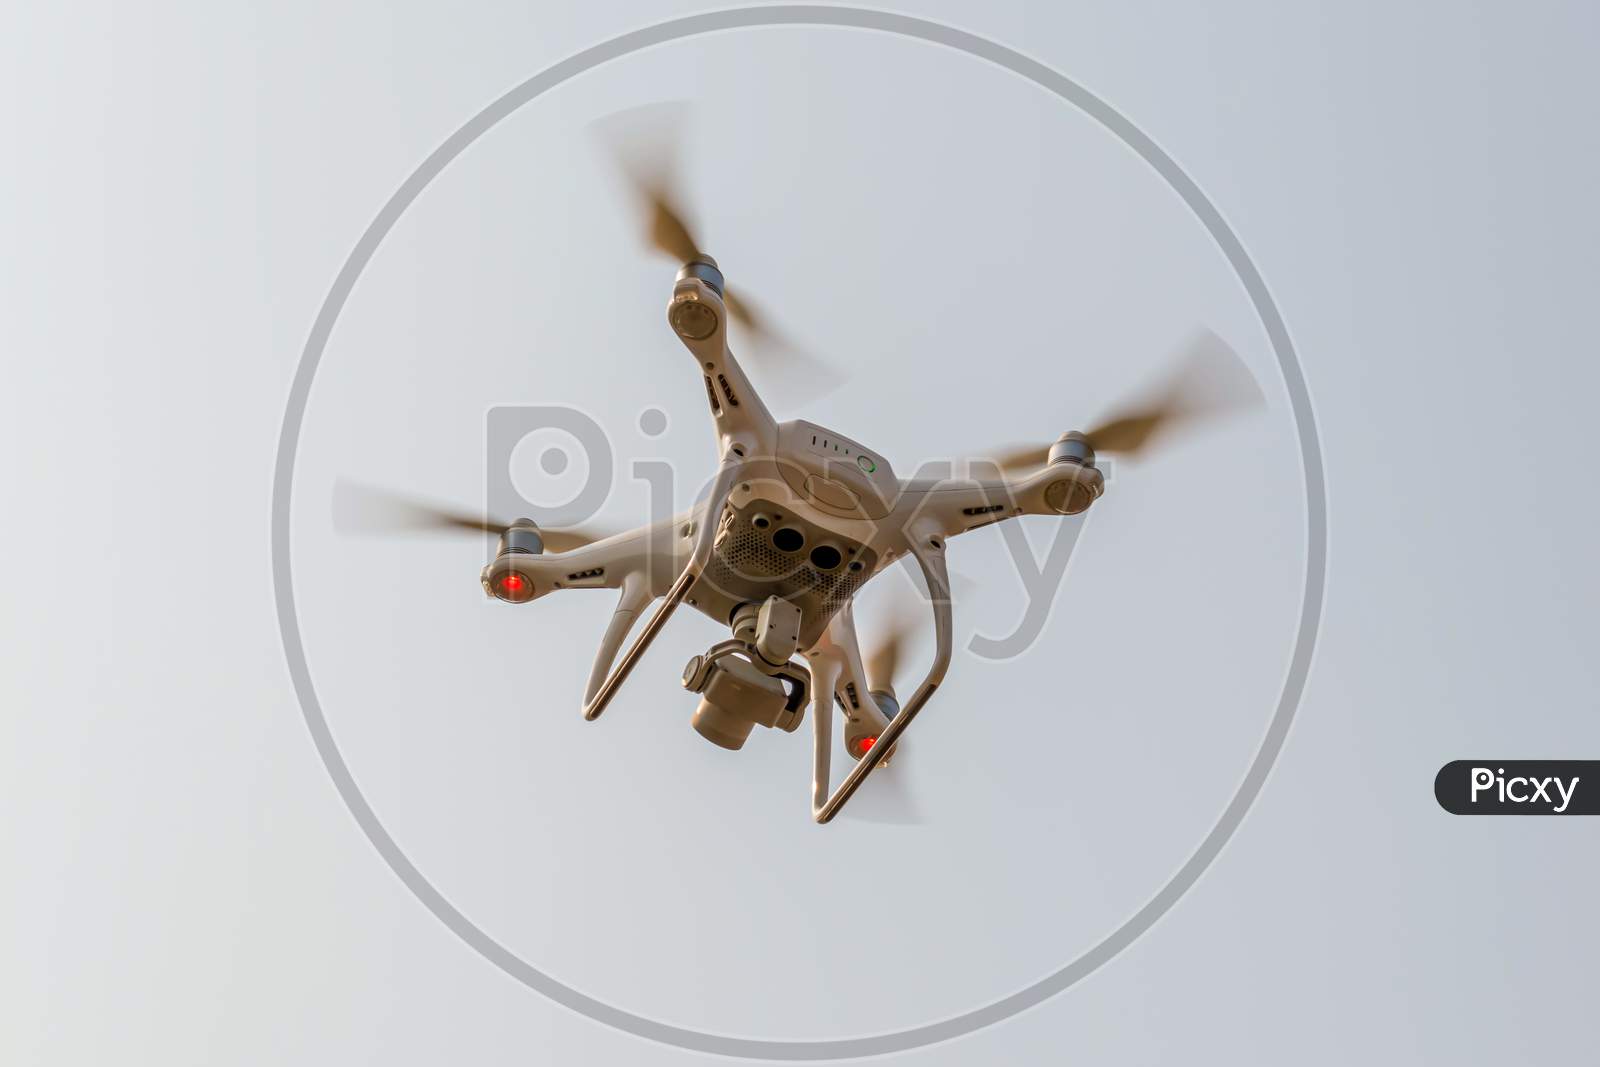 Modern Rc Drone / Quadcopter With Camera Flying In A Bright And Clear Blue Sky. New Technology In The Aero Photo Shooting.